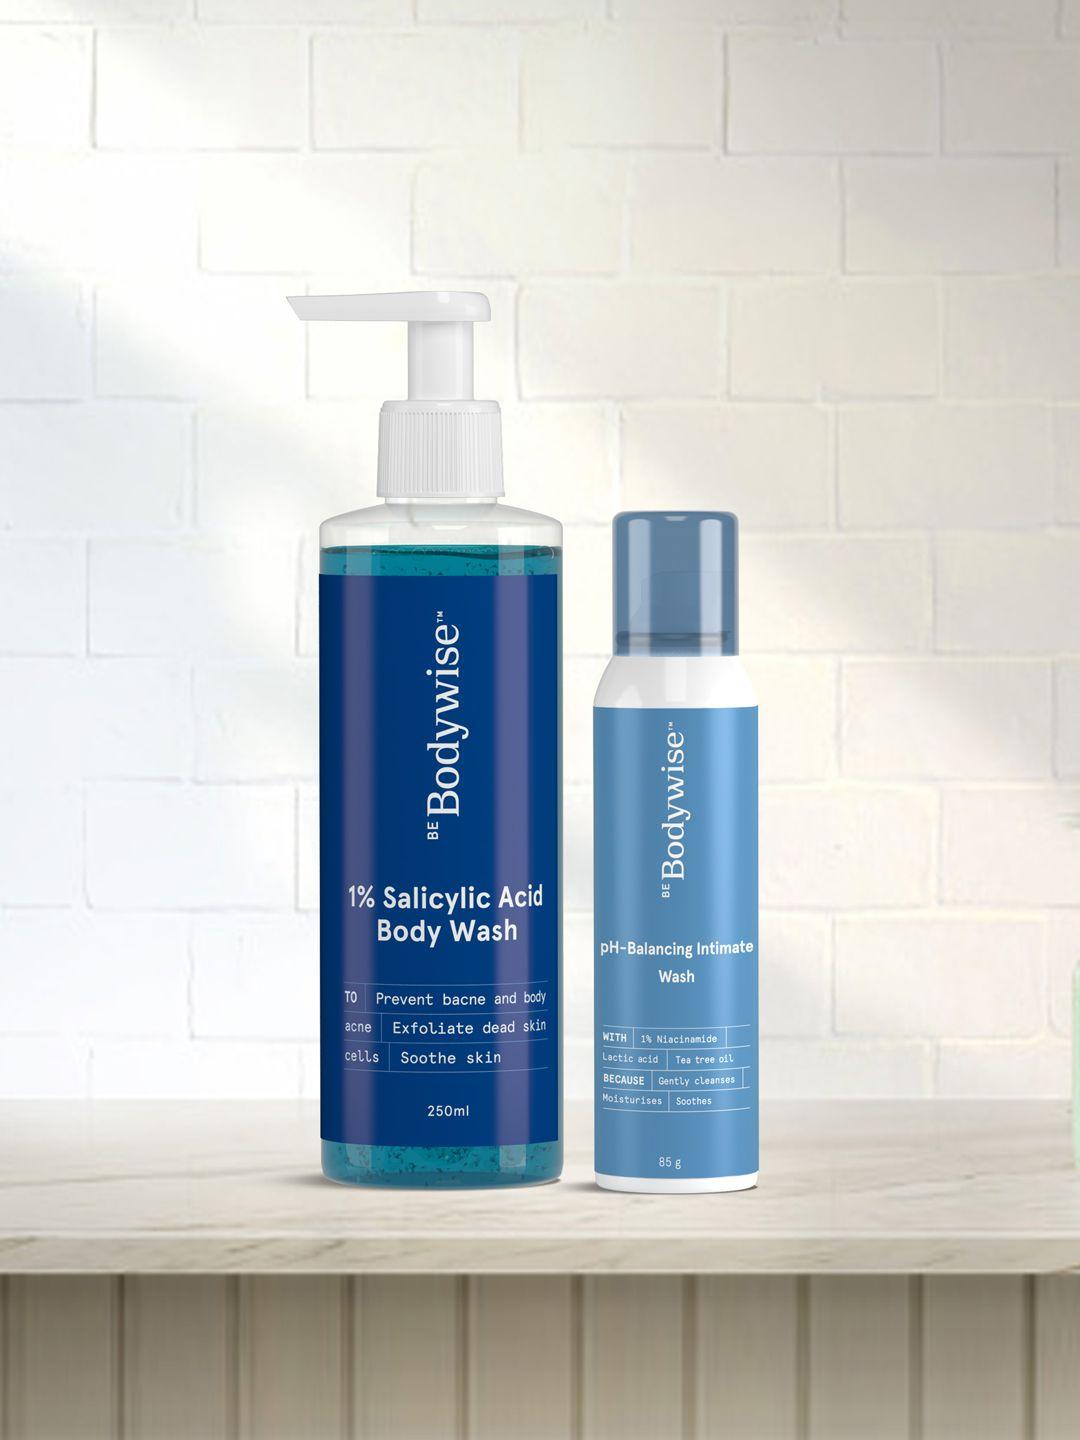 be bodywise complete body cleansing kit - body wash & intimate wash